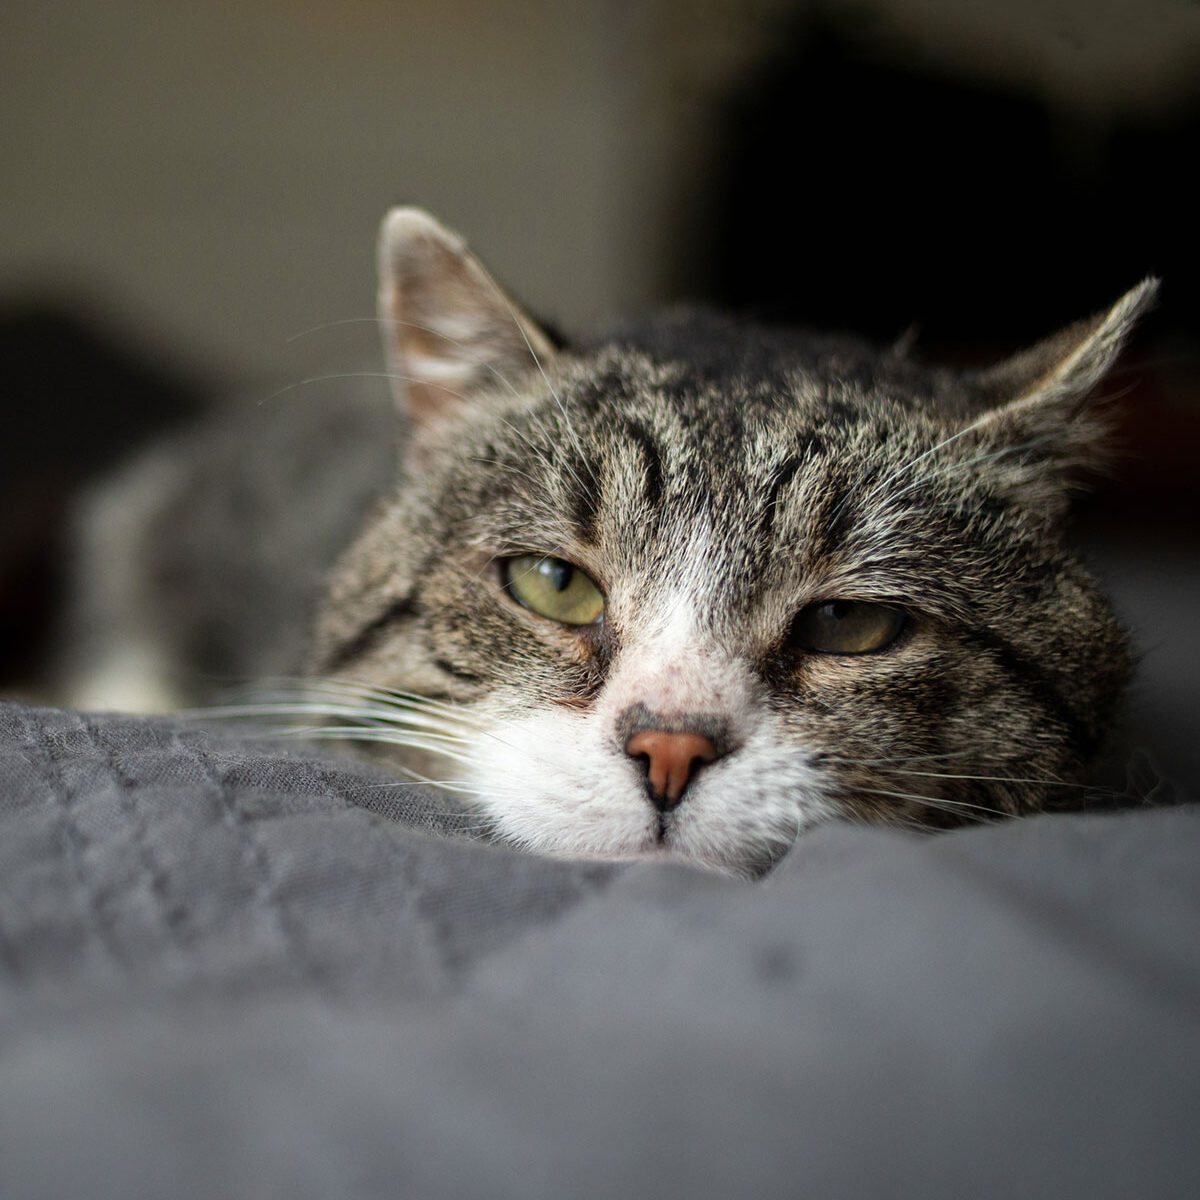 Old Tabby Cat In Bed